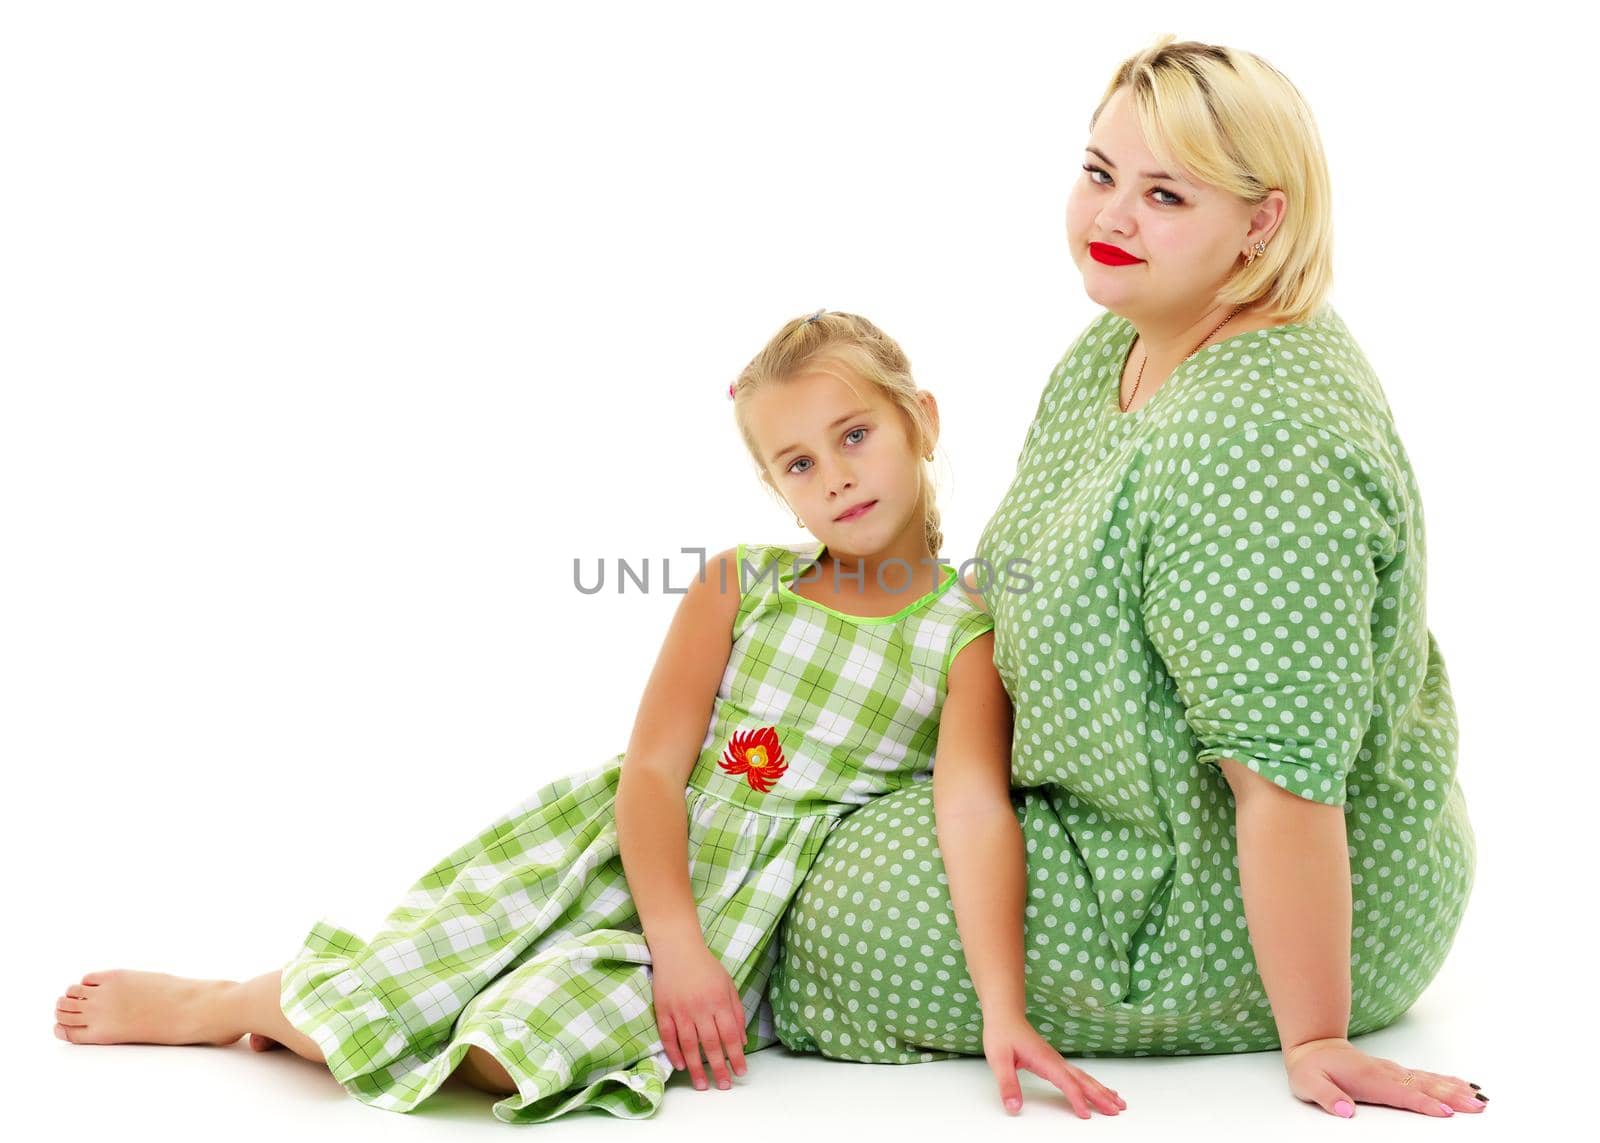 Happy family mom and little daughter, studio portrait on white background.Isolated.